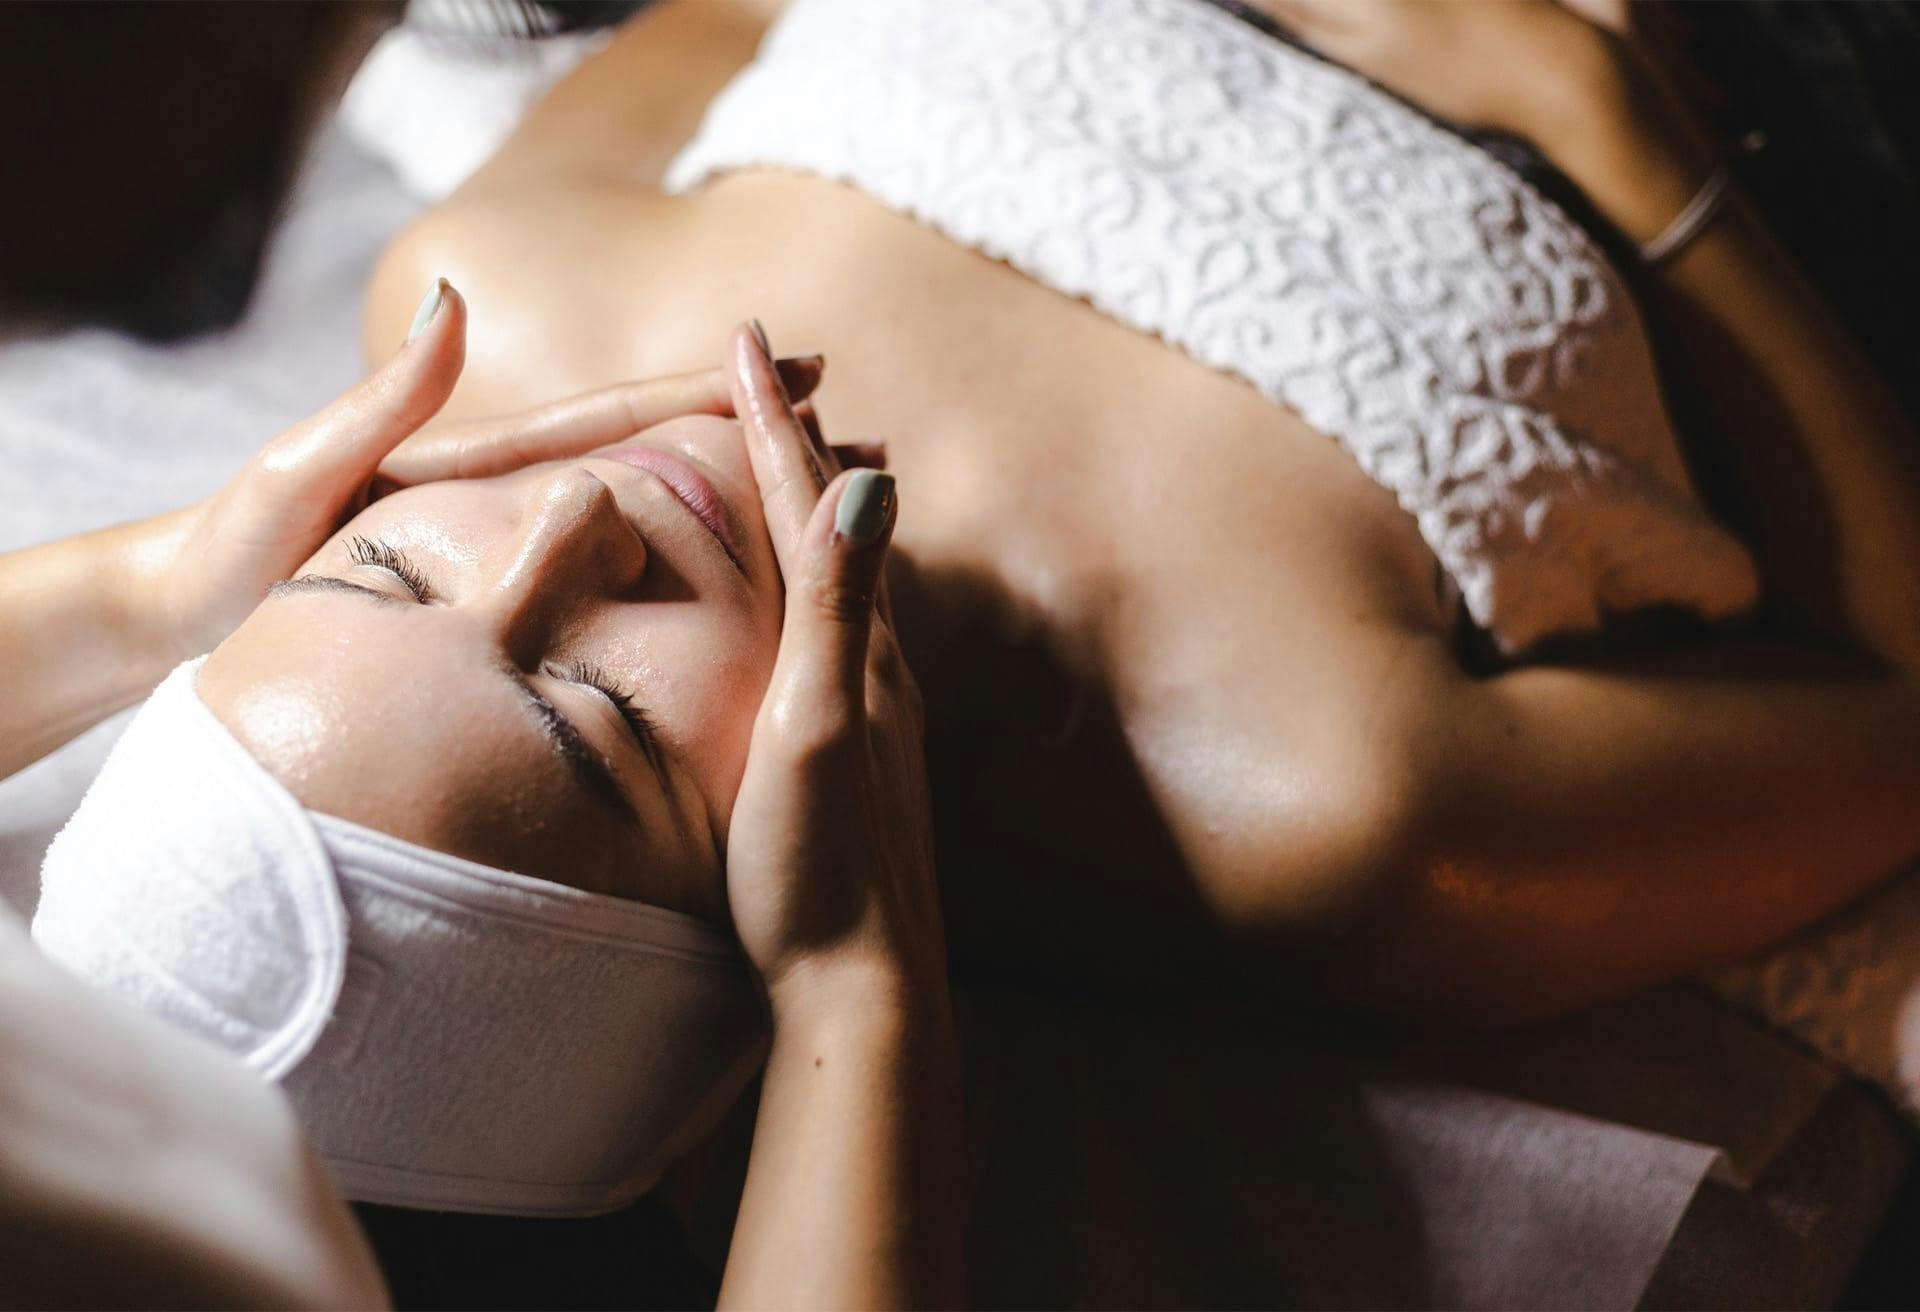 an image of a woman getting a facial laying on a table in a white towel